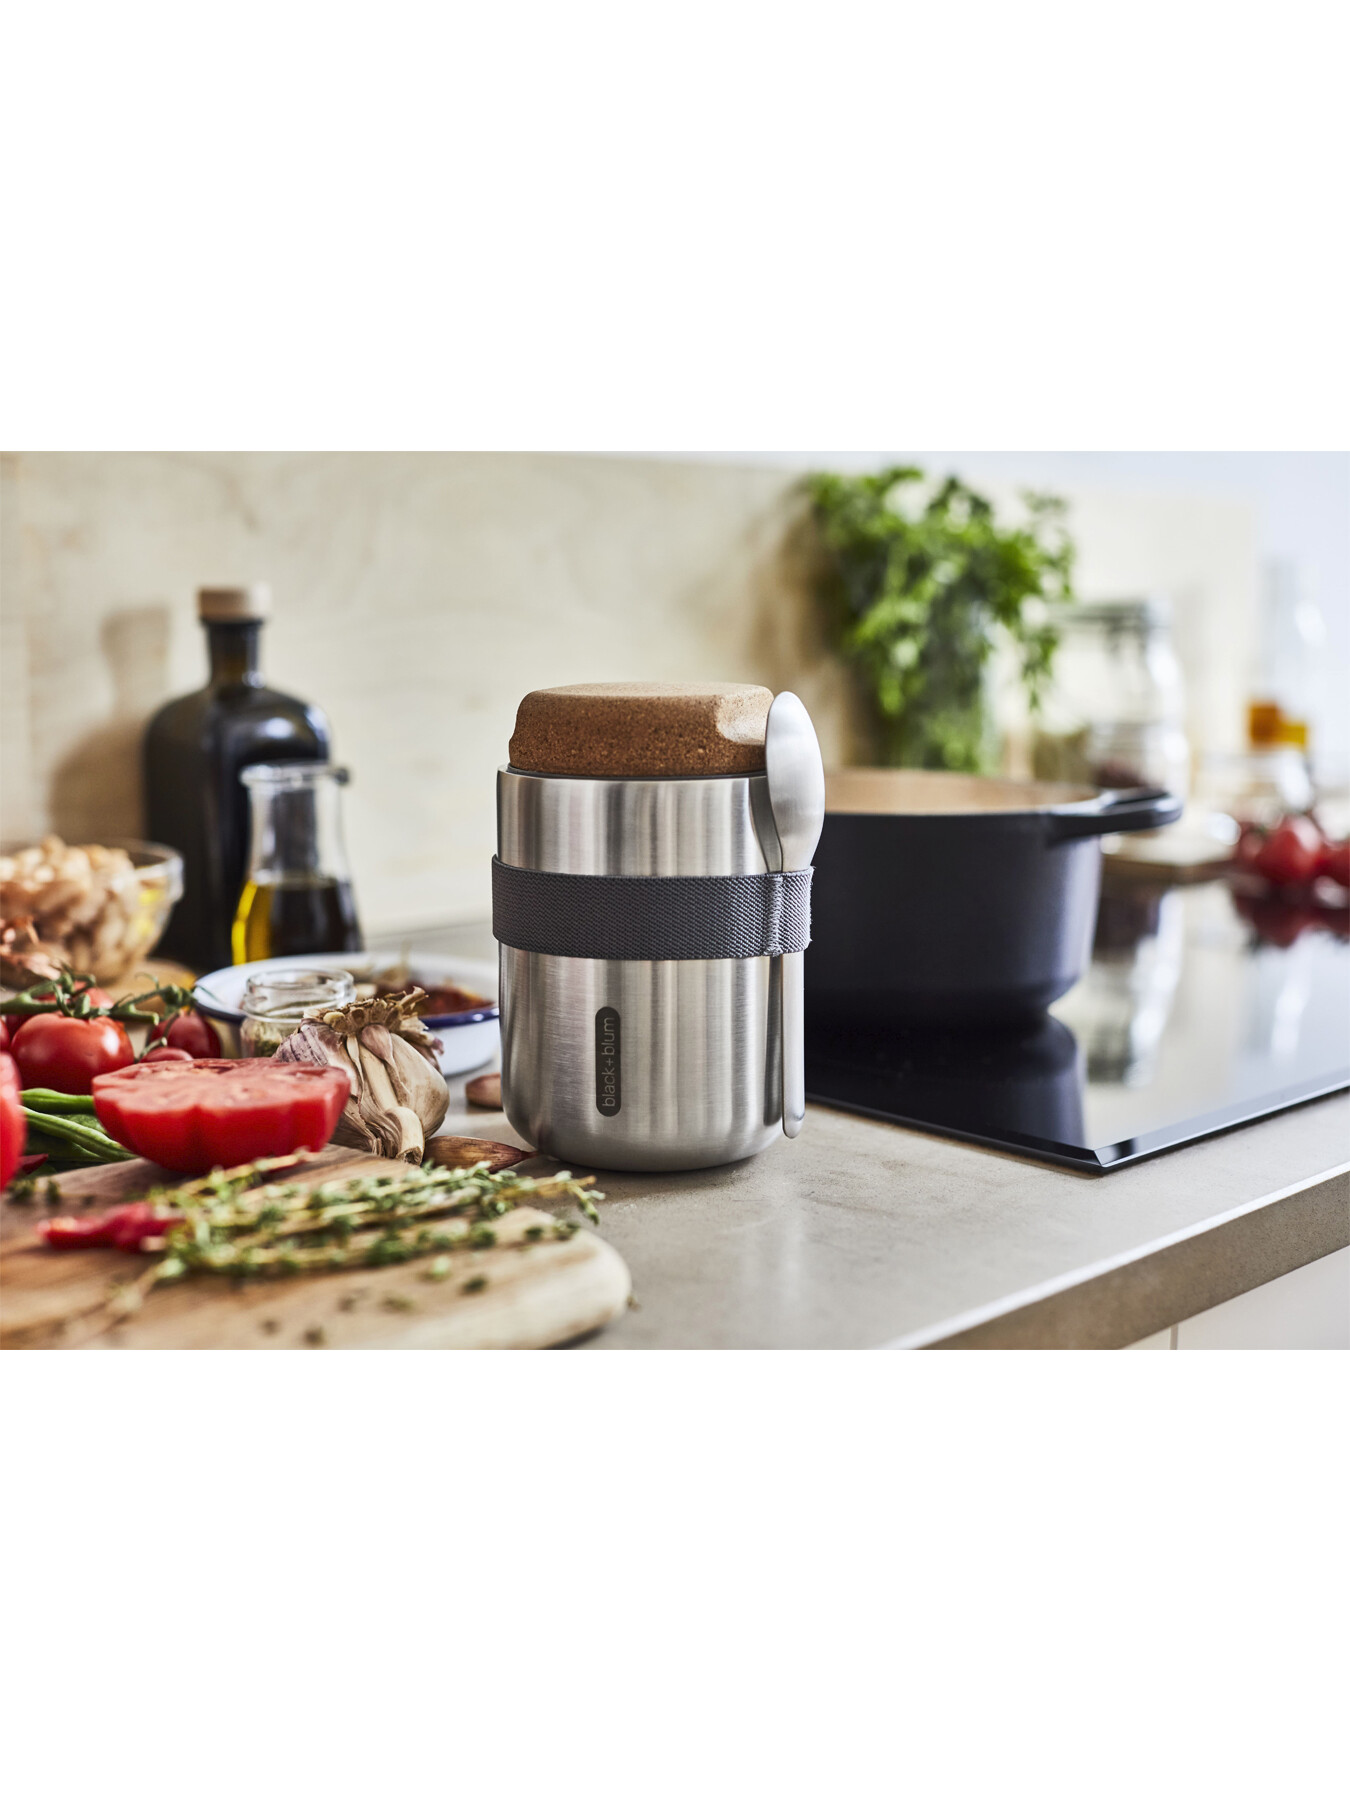 Black + Blum  Thermo Pot - Stainless Steel Cork Top Vacuum Sealed Ins